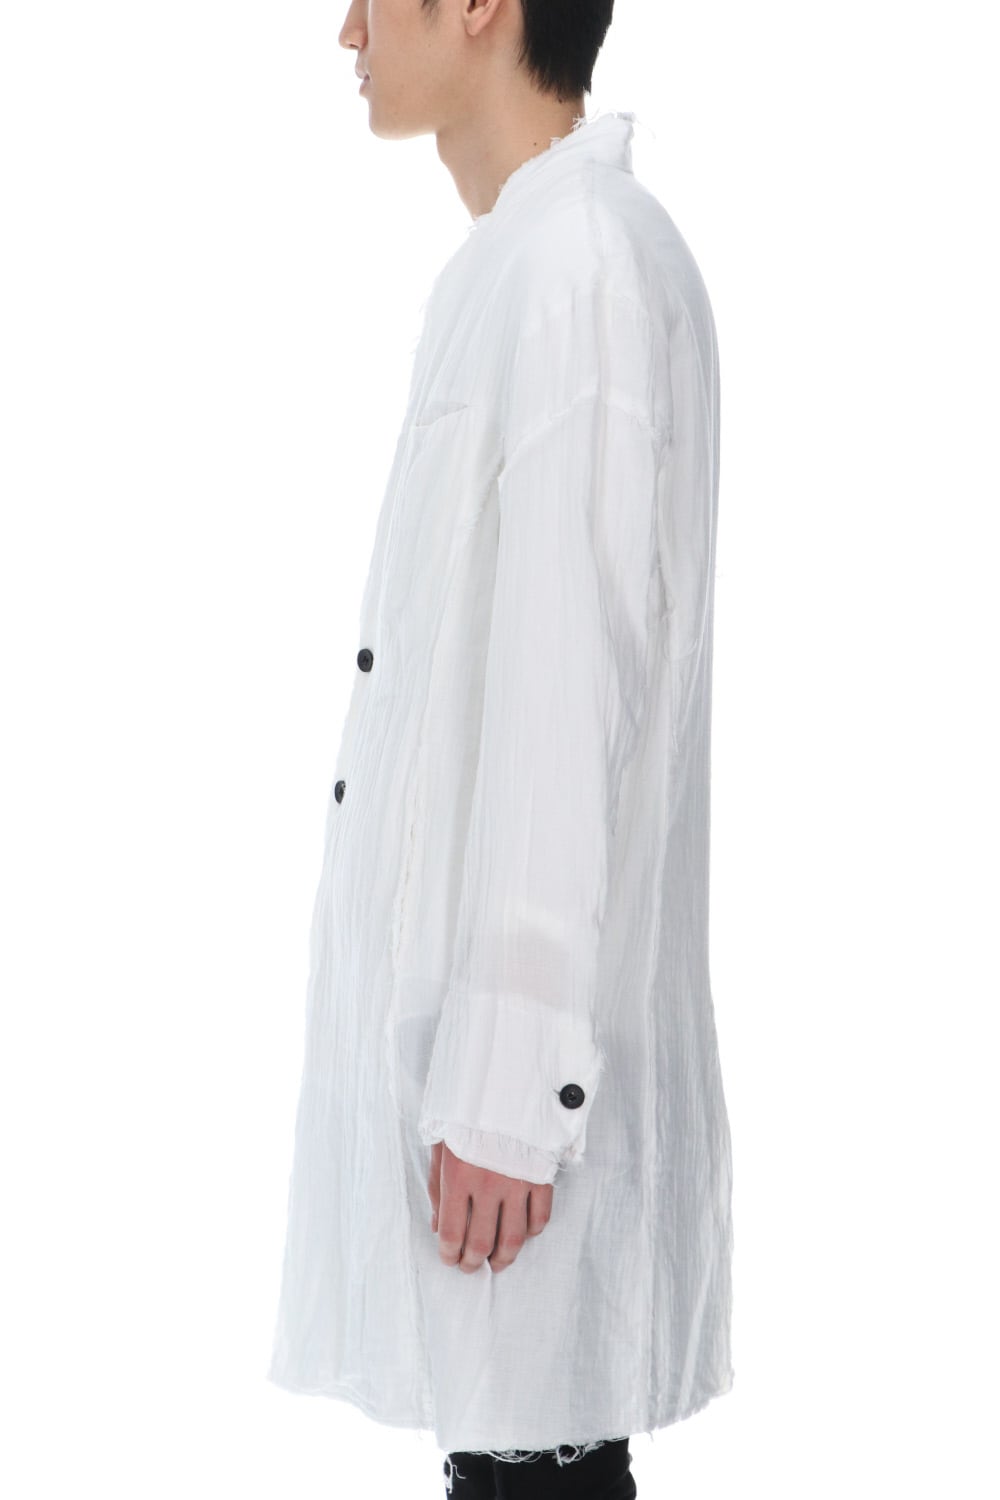 Conductor Jacket White